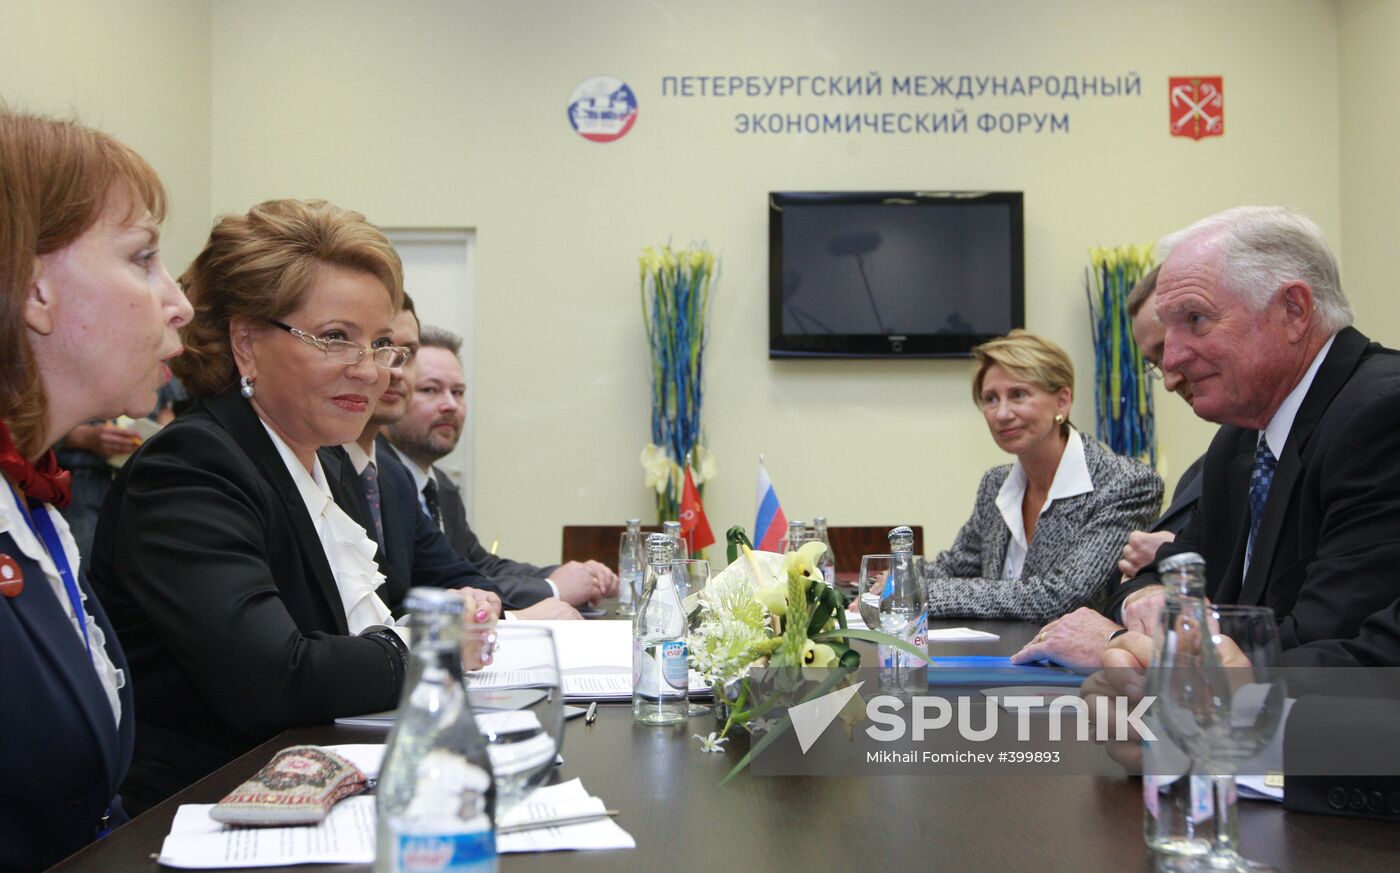 Signing of agreement between Intel and St. Petersburg government